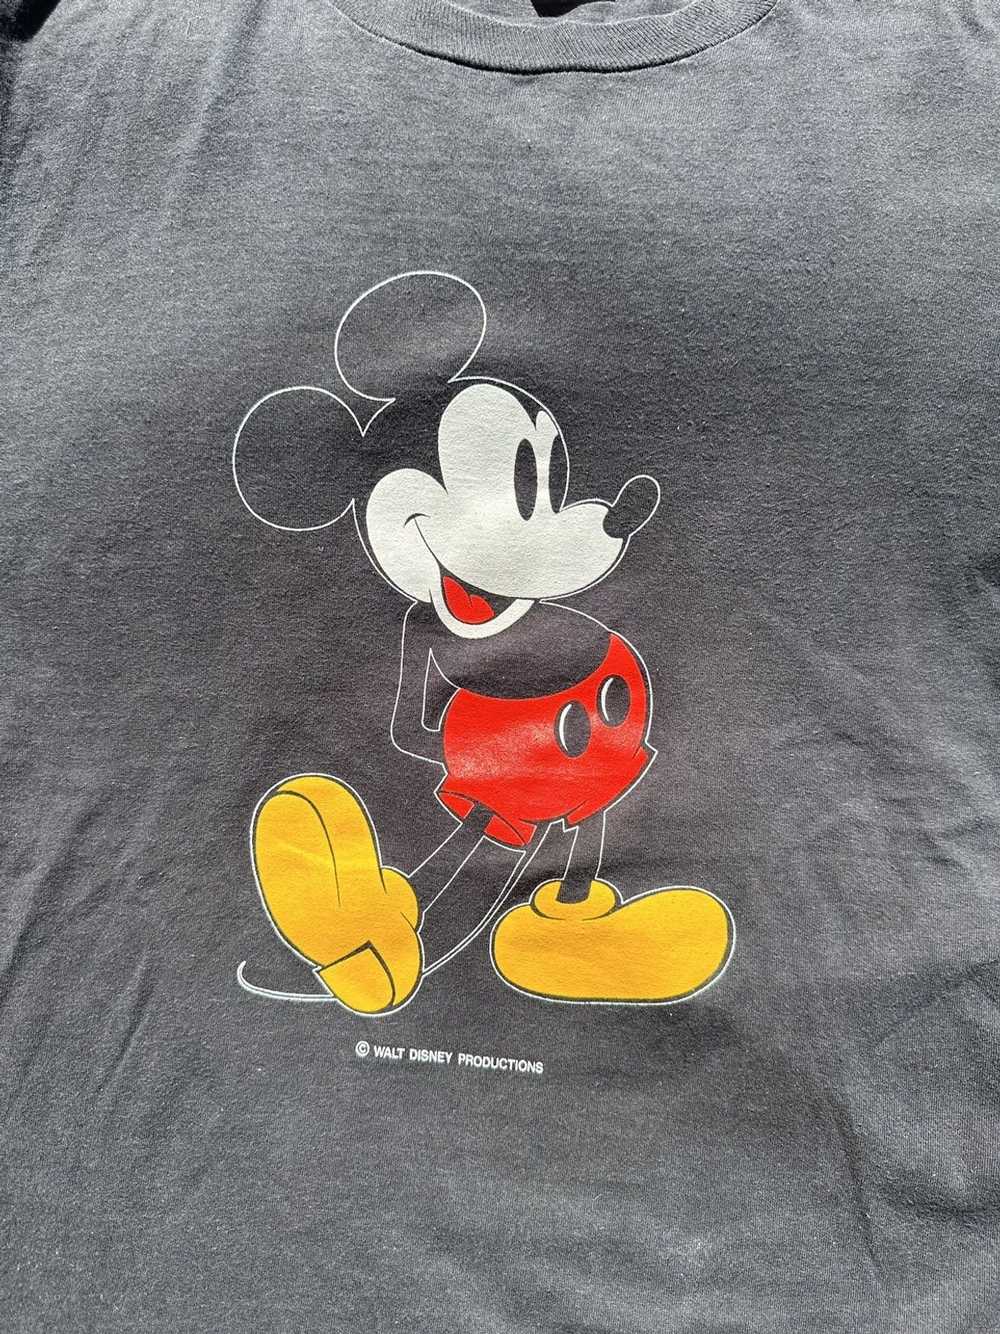 Vintage Mickey Mouse T Shirt - image 2